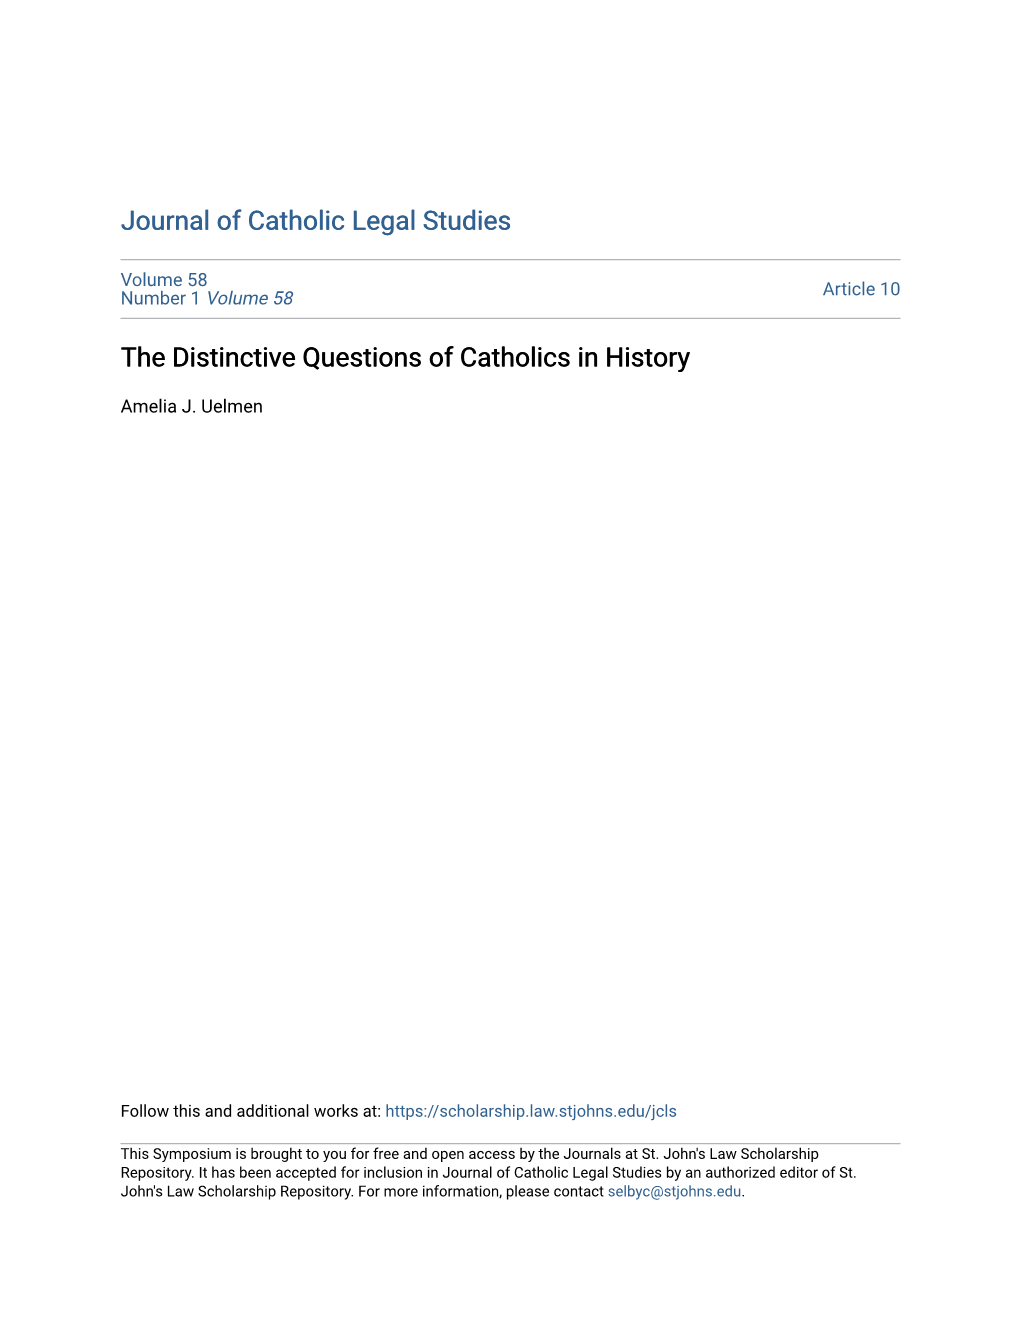 The Distinctive Questions of Catholics in History